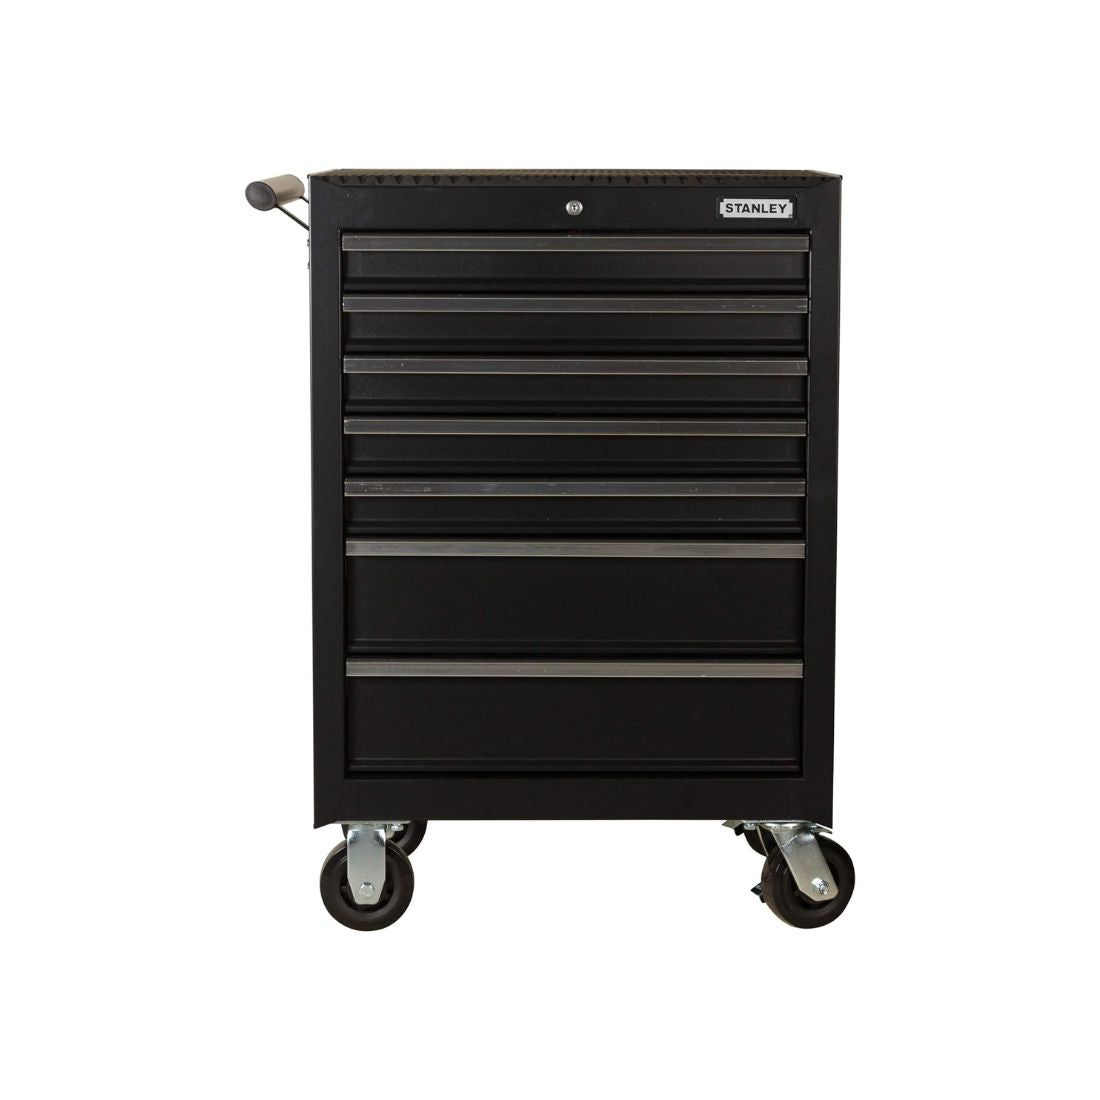 STANLEY 93-547-23ID Tools Storage Roller Cabinet with 7 Drawers